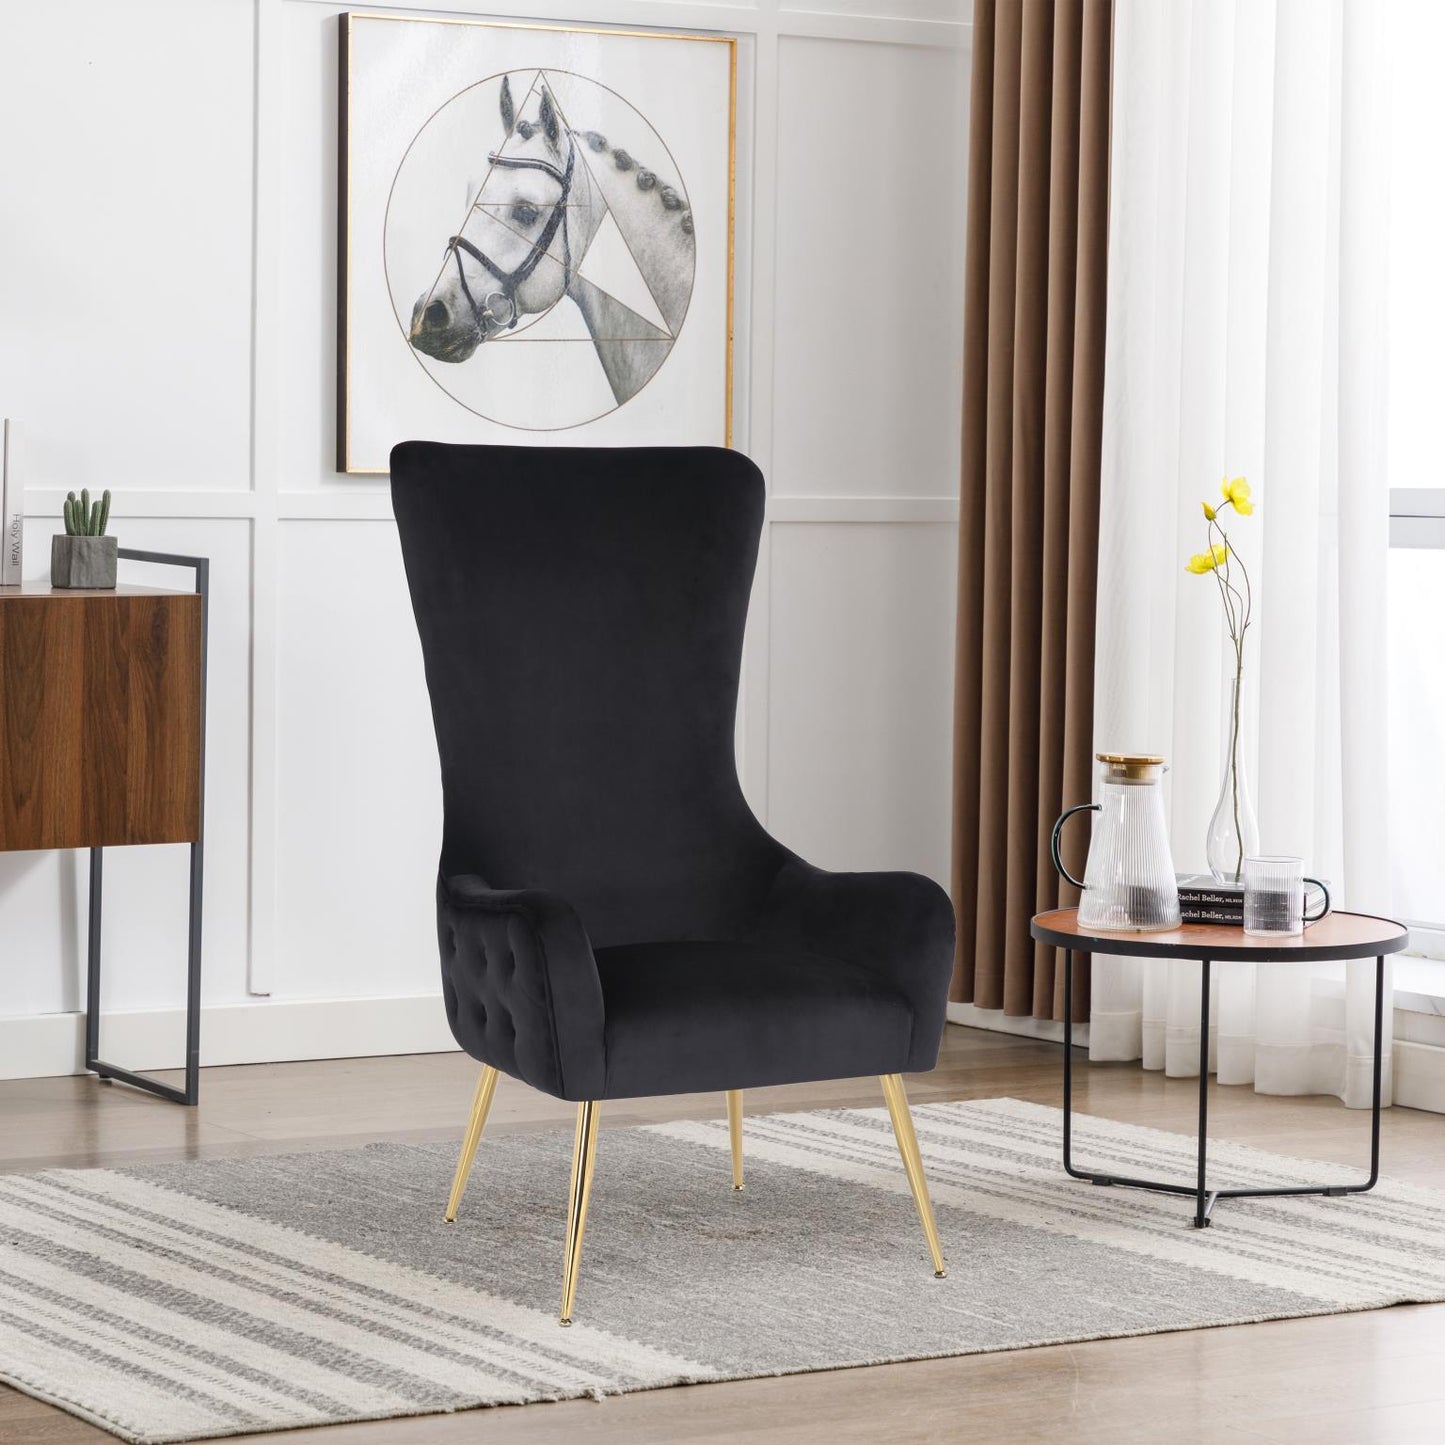 WINTER Black Accent Chair